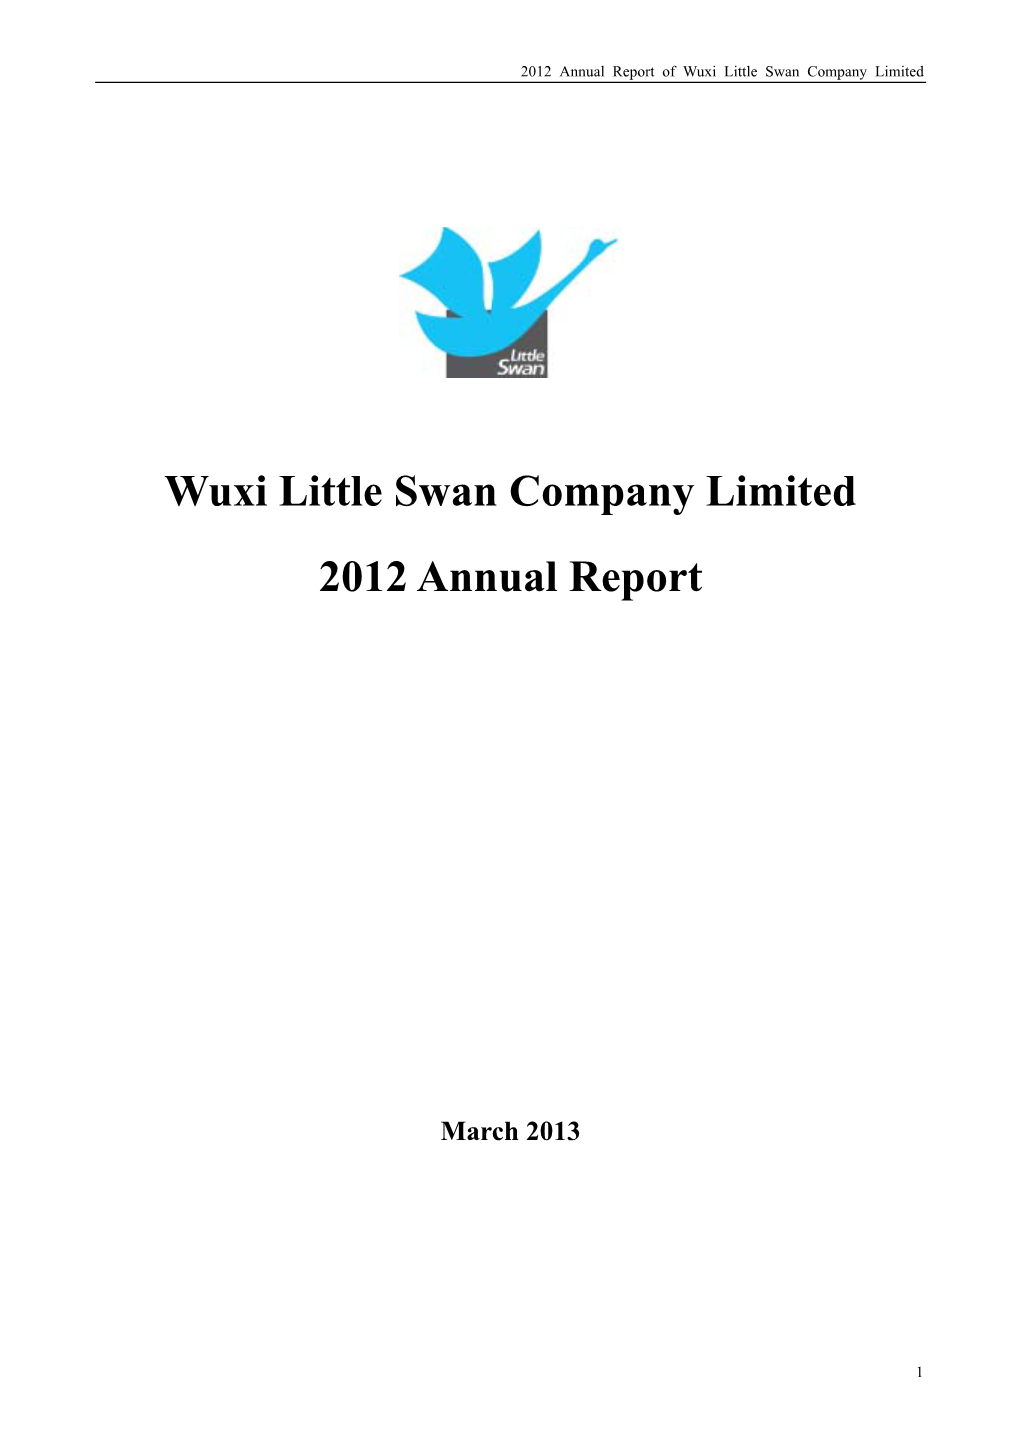 Wuxi Little Swan Company Limited 2012 Annual Report